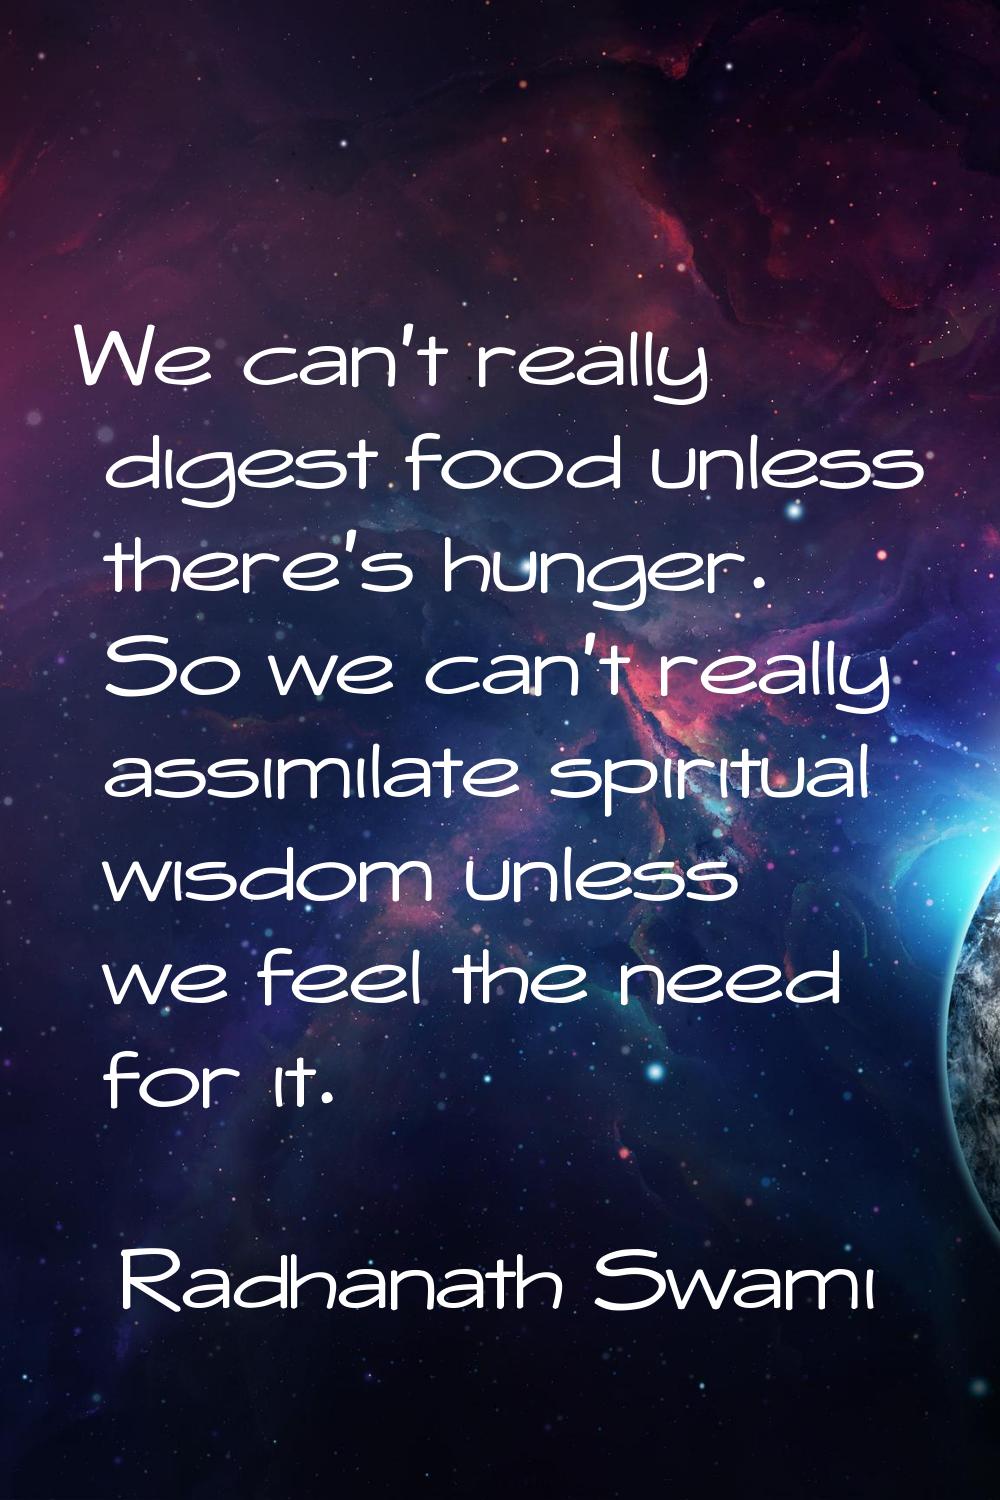 We can't really digest food unless there's hunger. So we can't really assimilate spiritual wisdom u